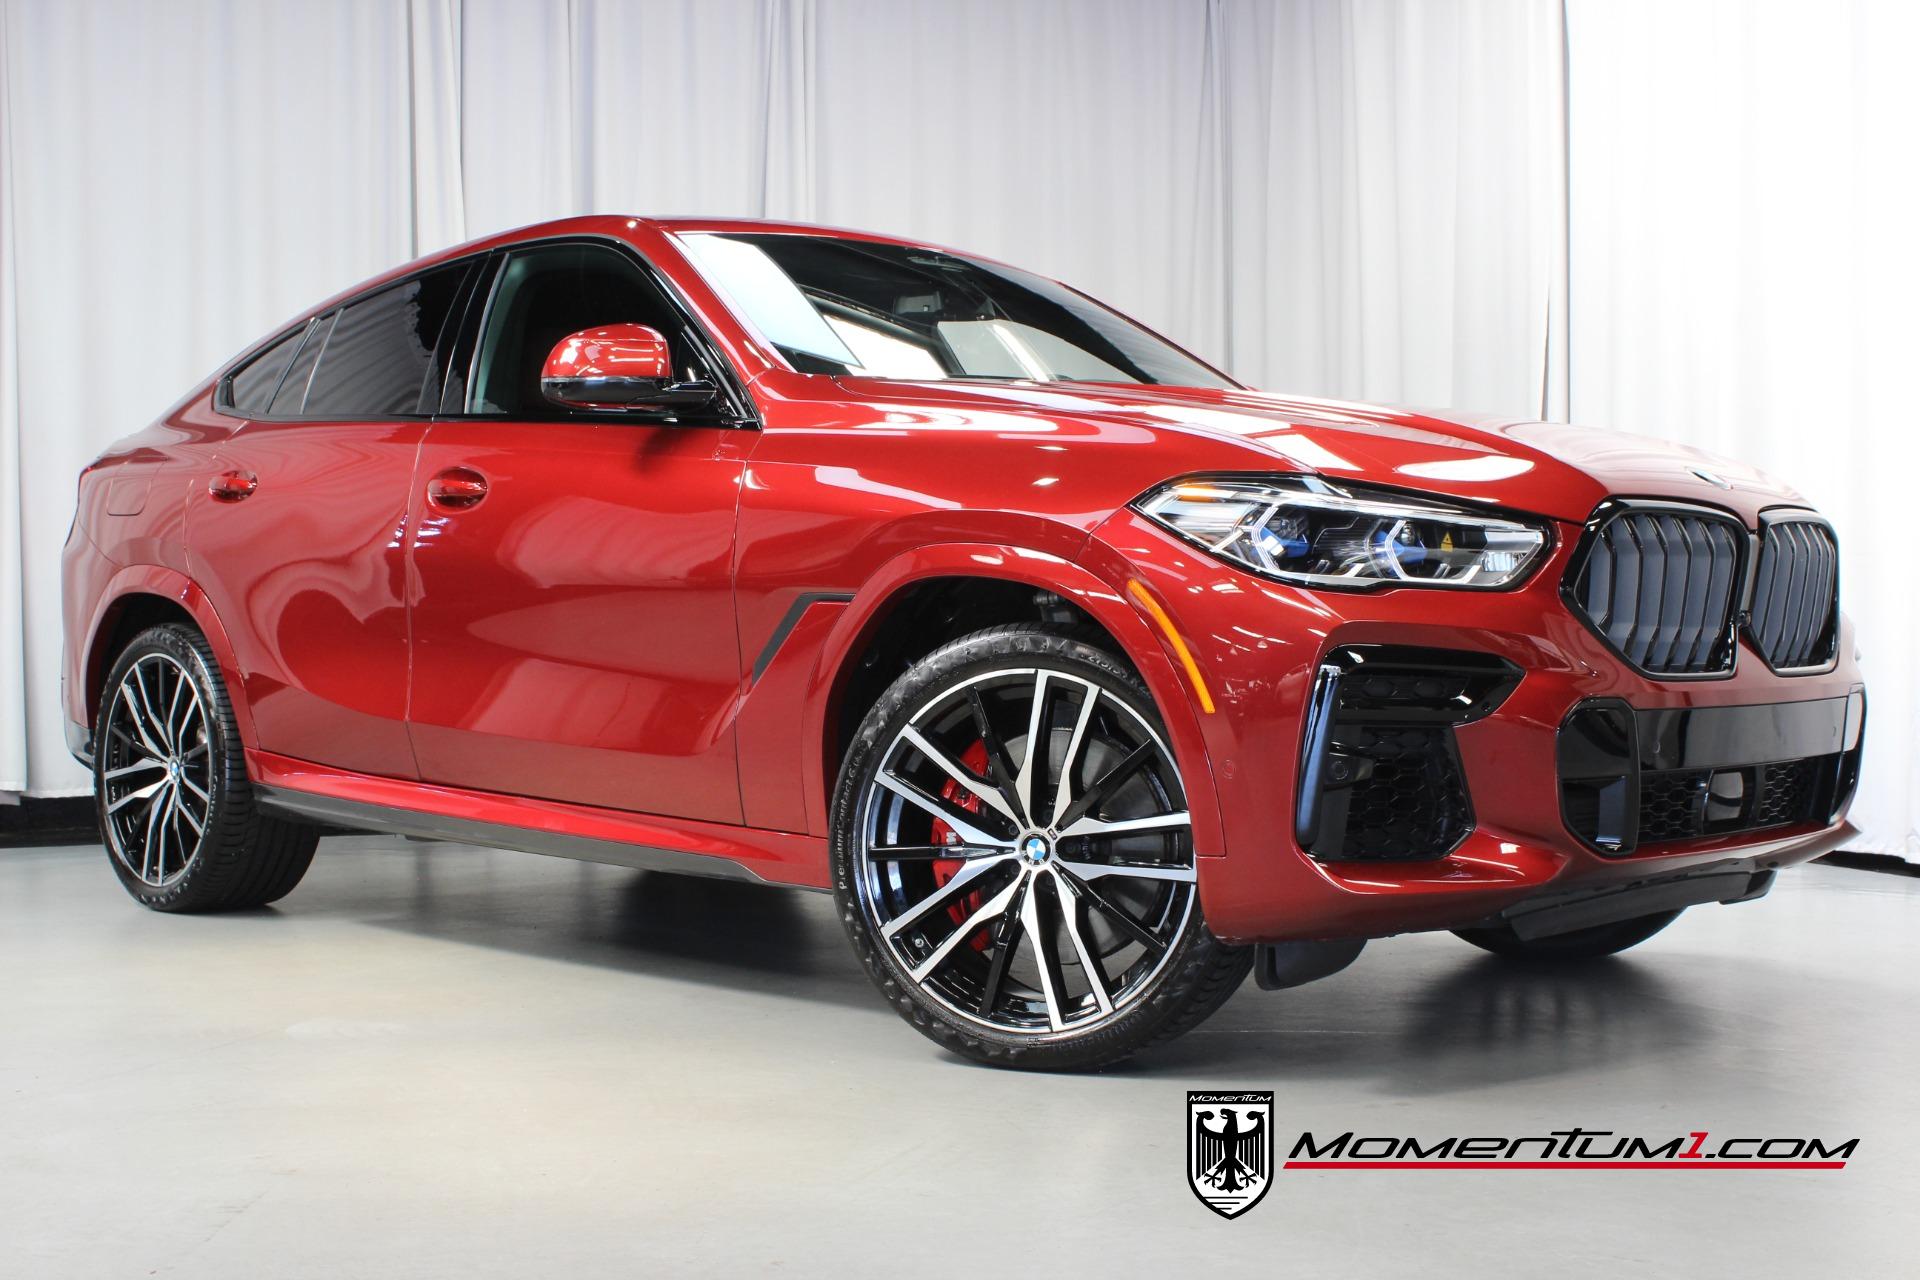 Used 2022 BMW X6 M50i For Sale (Sold) | Momentum Inc Stock